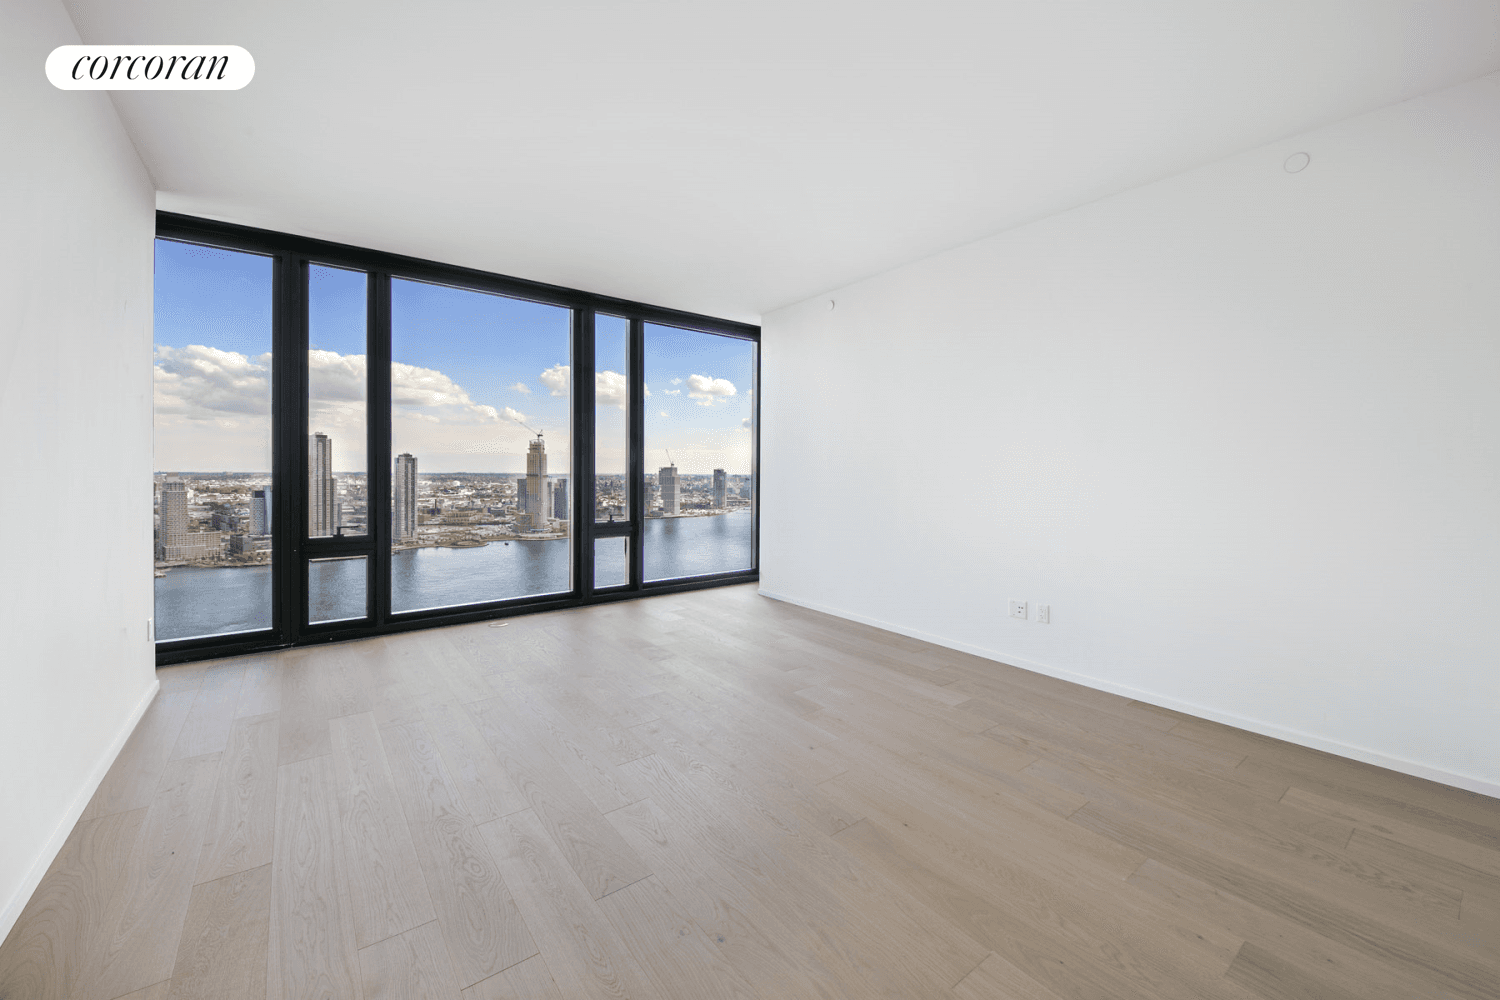 Residence 42A at One United Nations Park is a 2, 900sf four bedroom, four bathroom plus powder room, residence overlooking the East River.